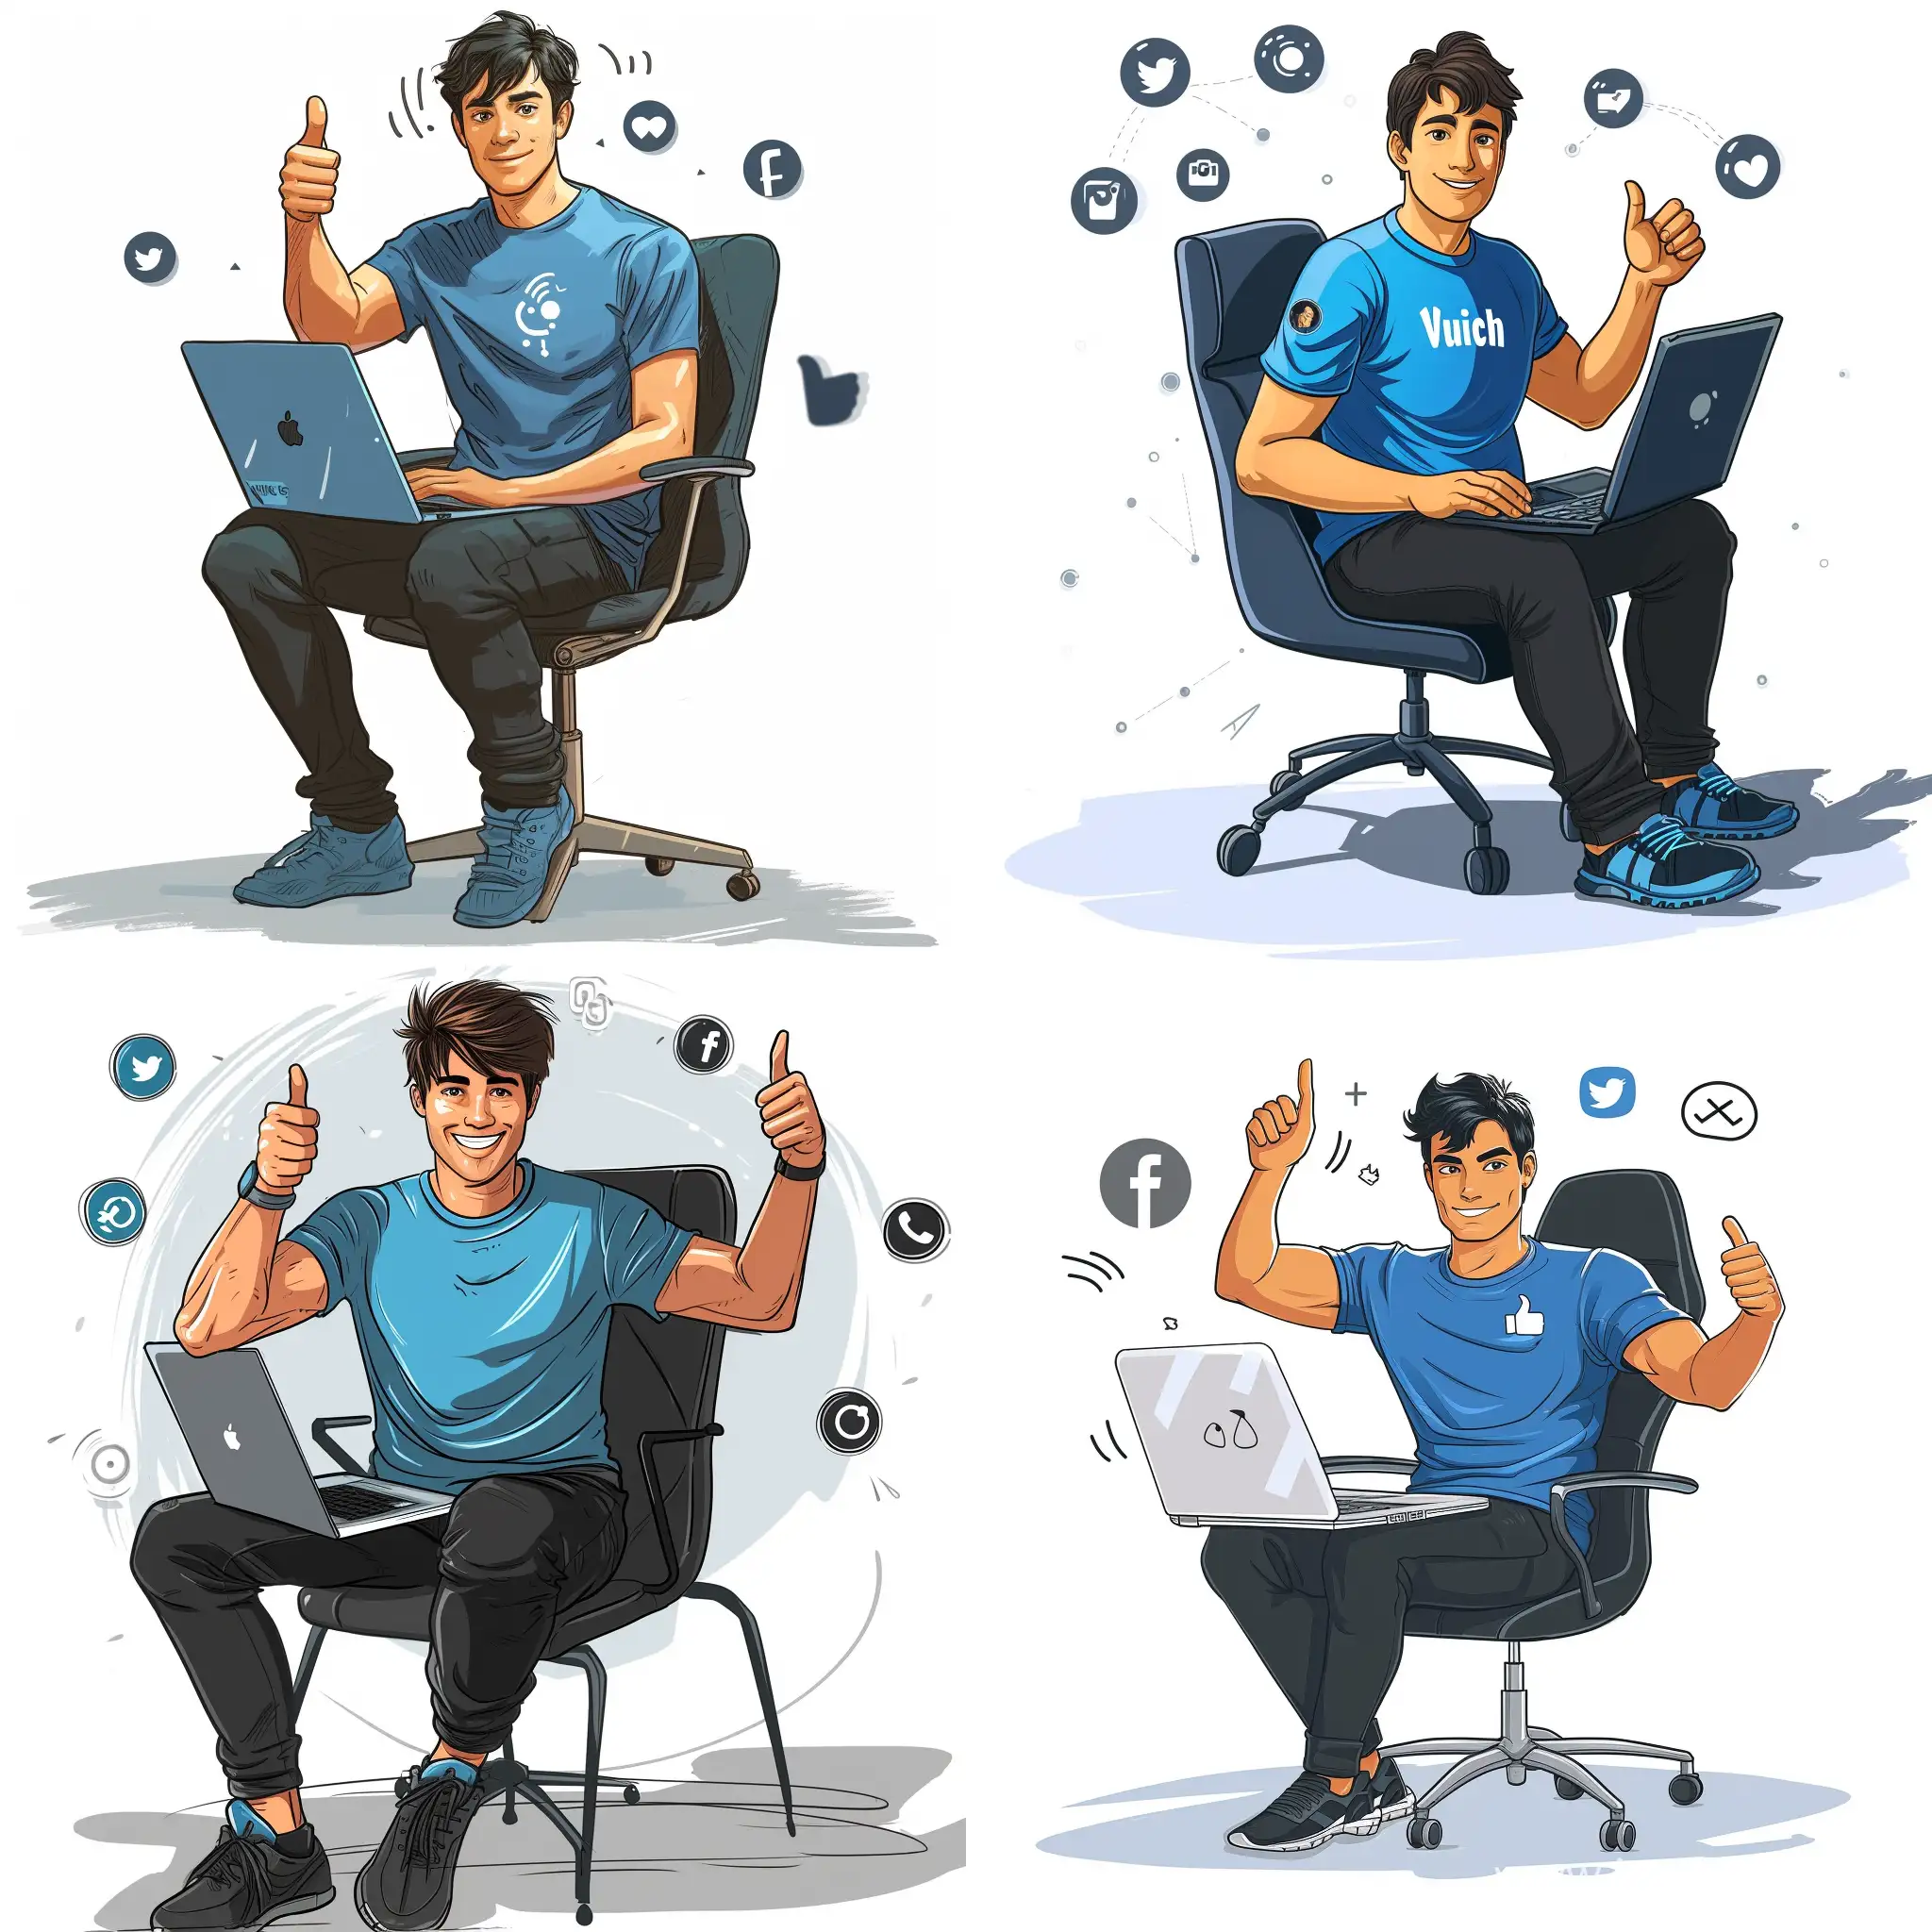 Enthusiastic-Programmer-Victor-with-Laptop-and-Social-Media-Icons